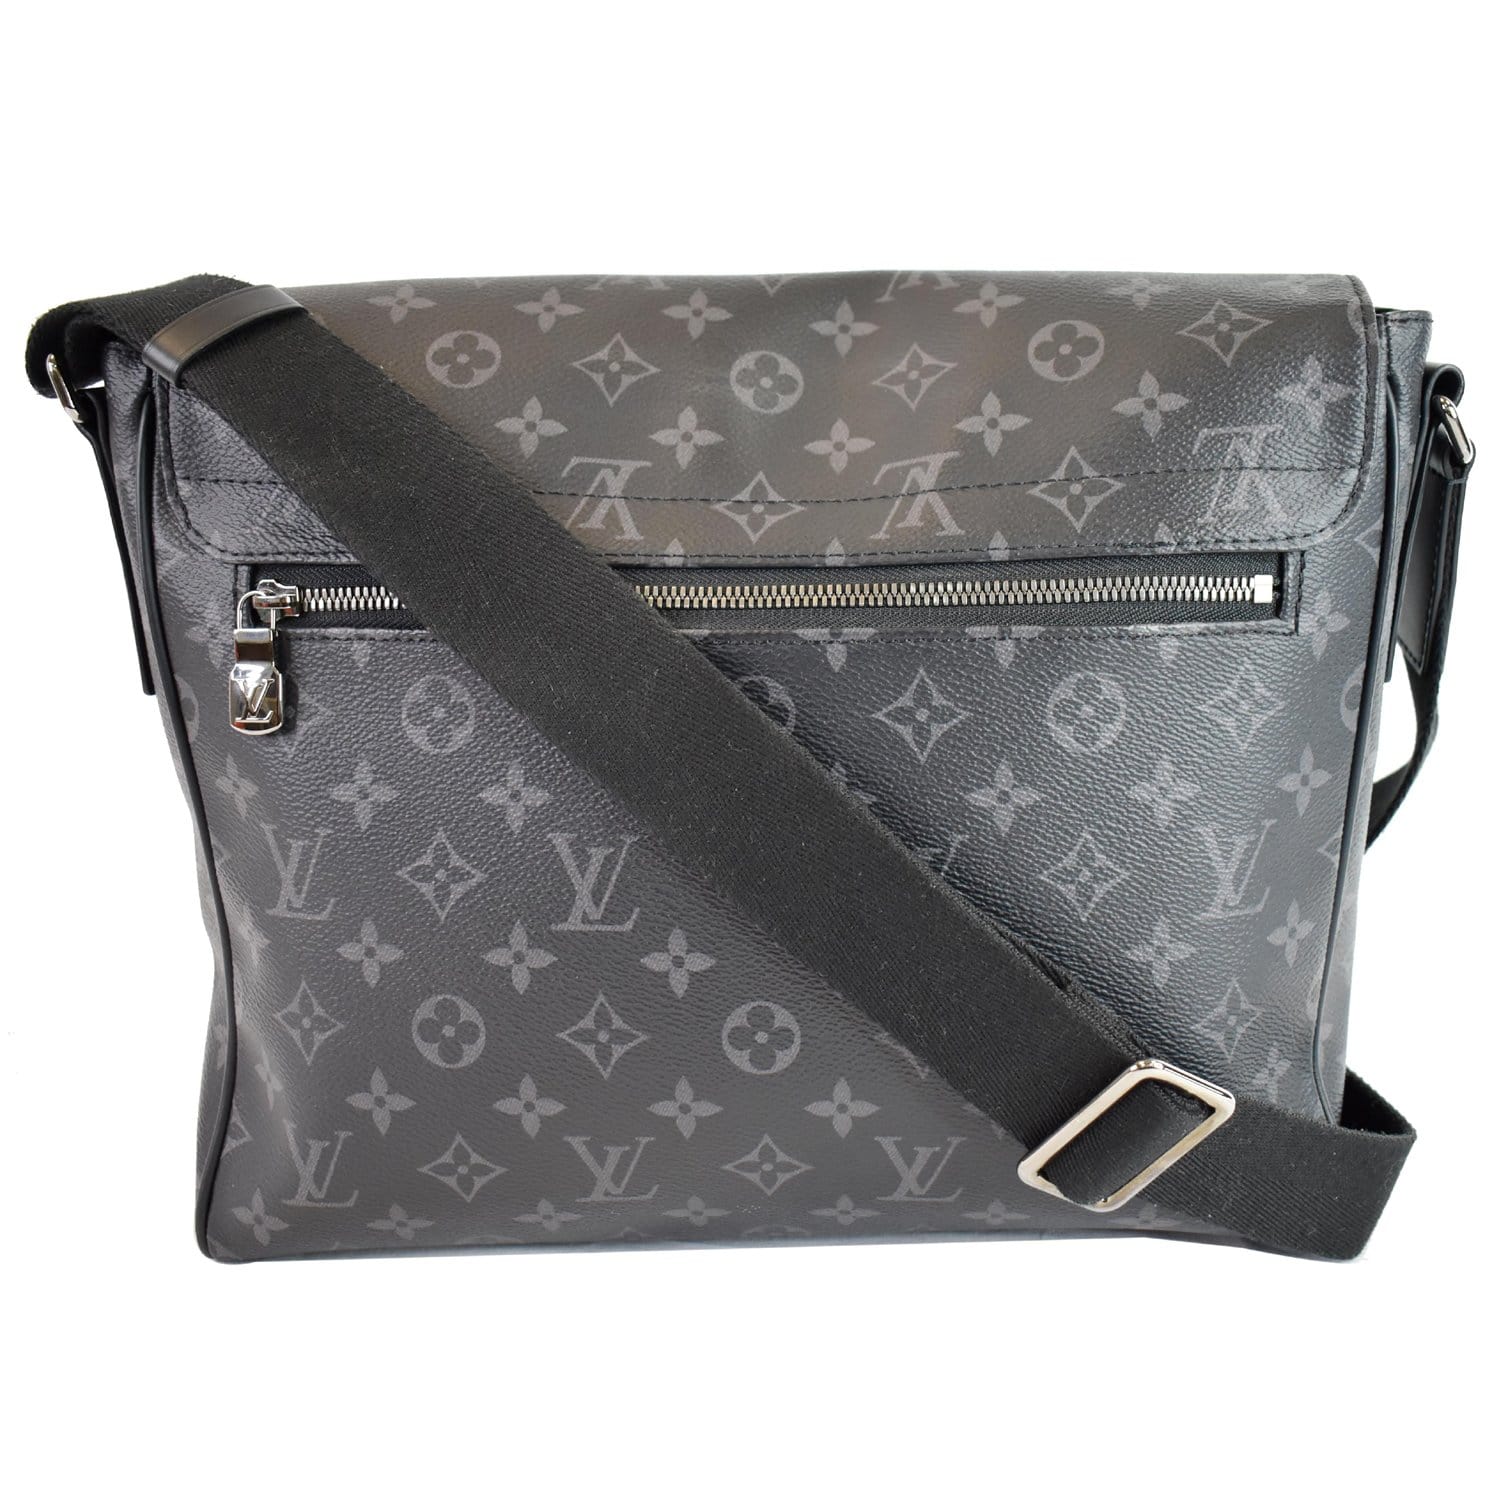 Louis Vuitton 'Monceau' Messenger bag reference guide - Spotted Fashion